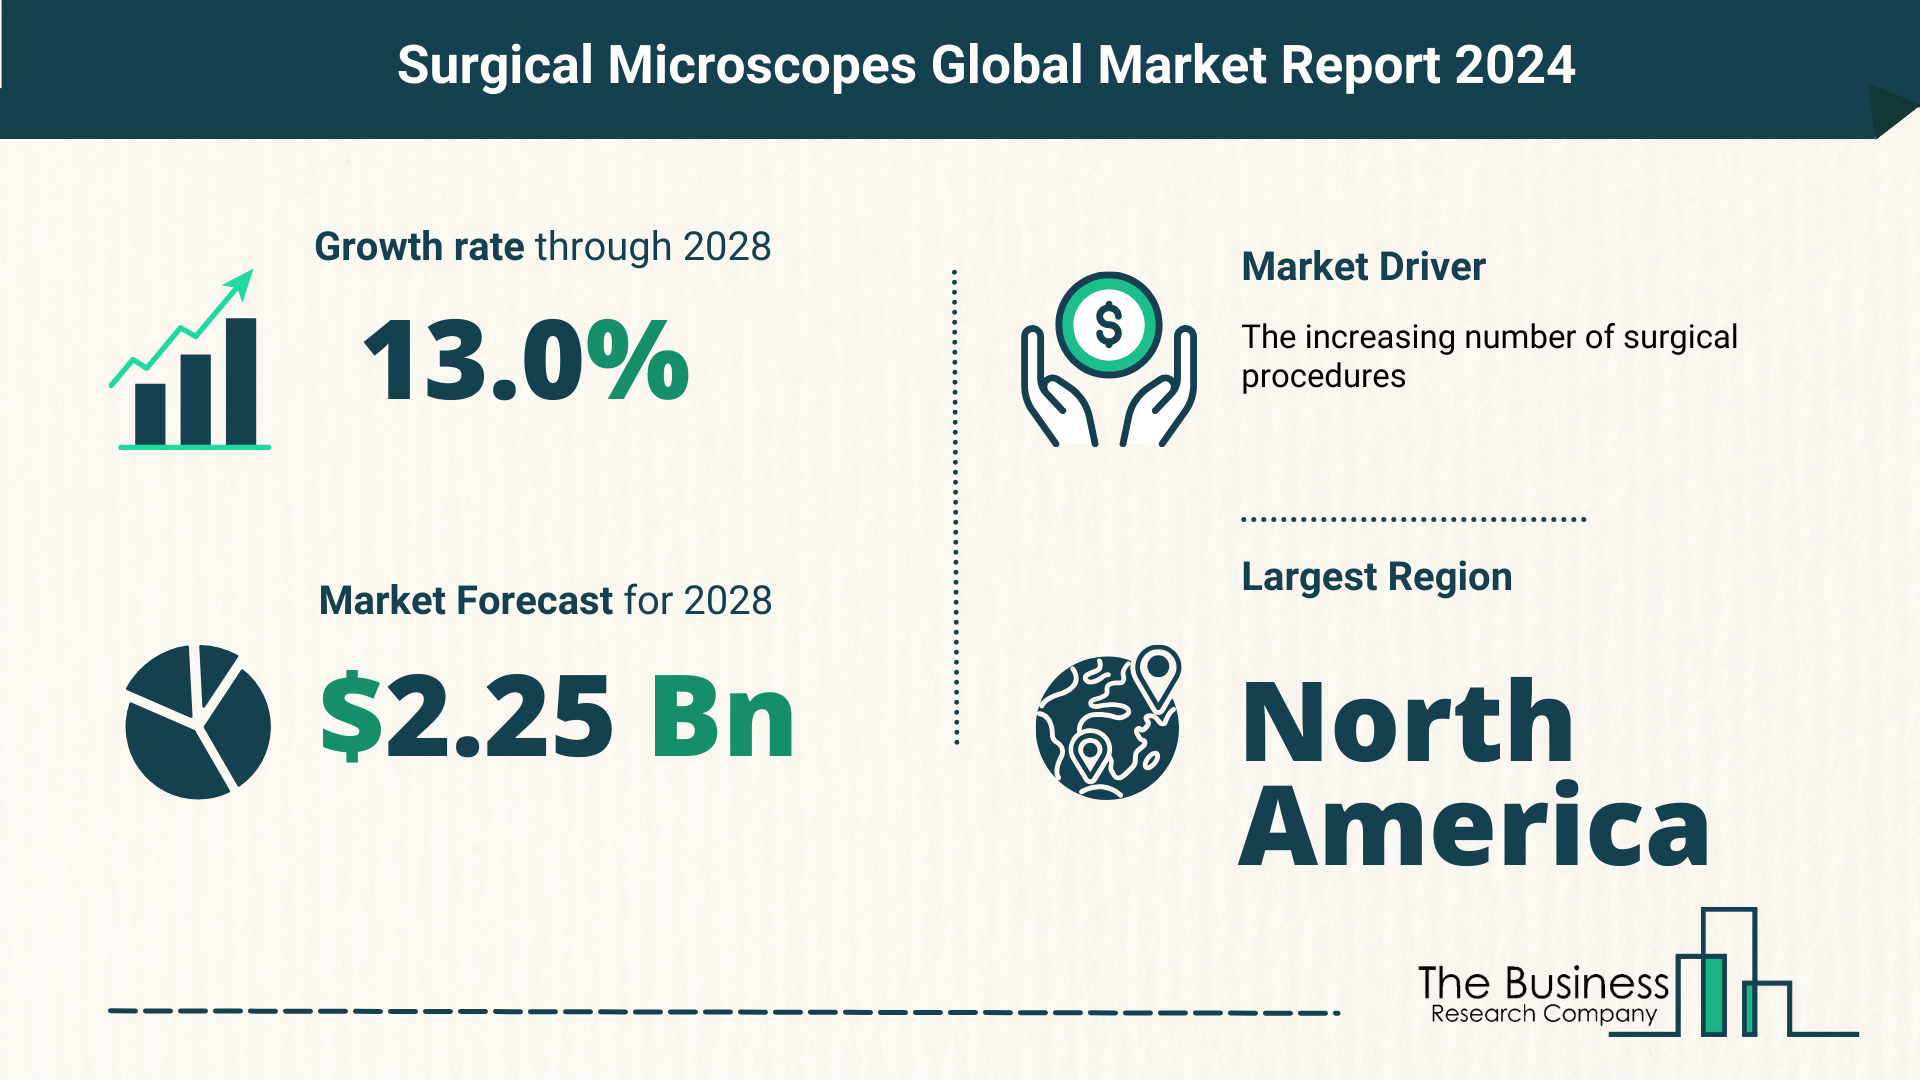 What Is The Forecast Growth Rate For The Surgical Microscopes Market?